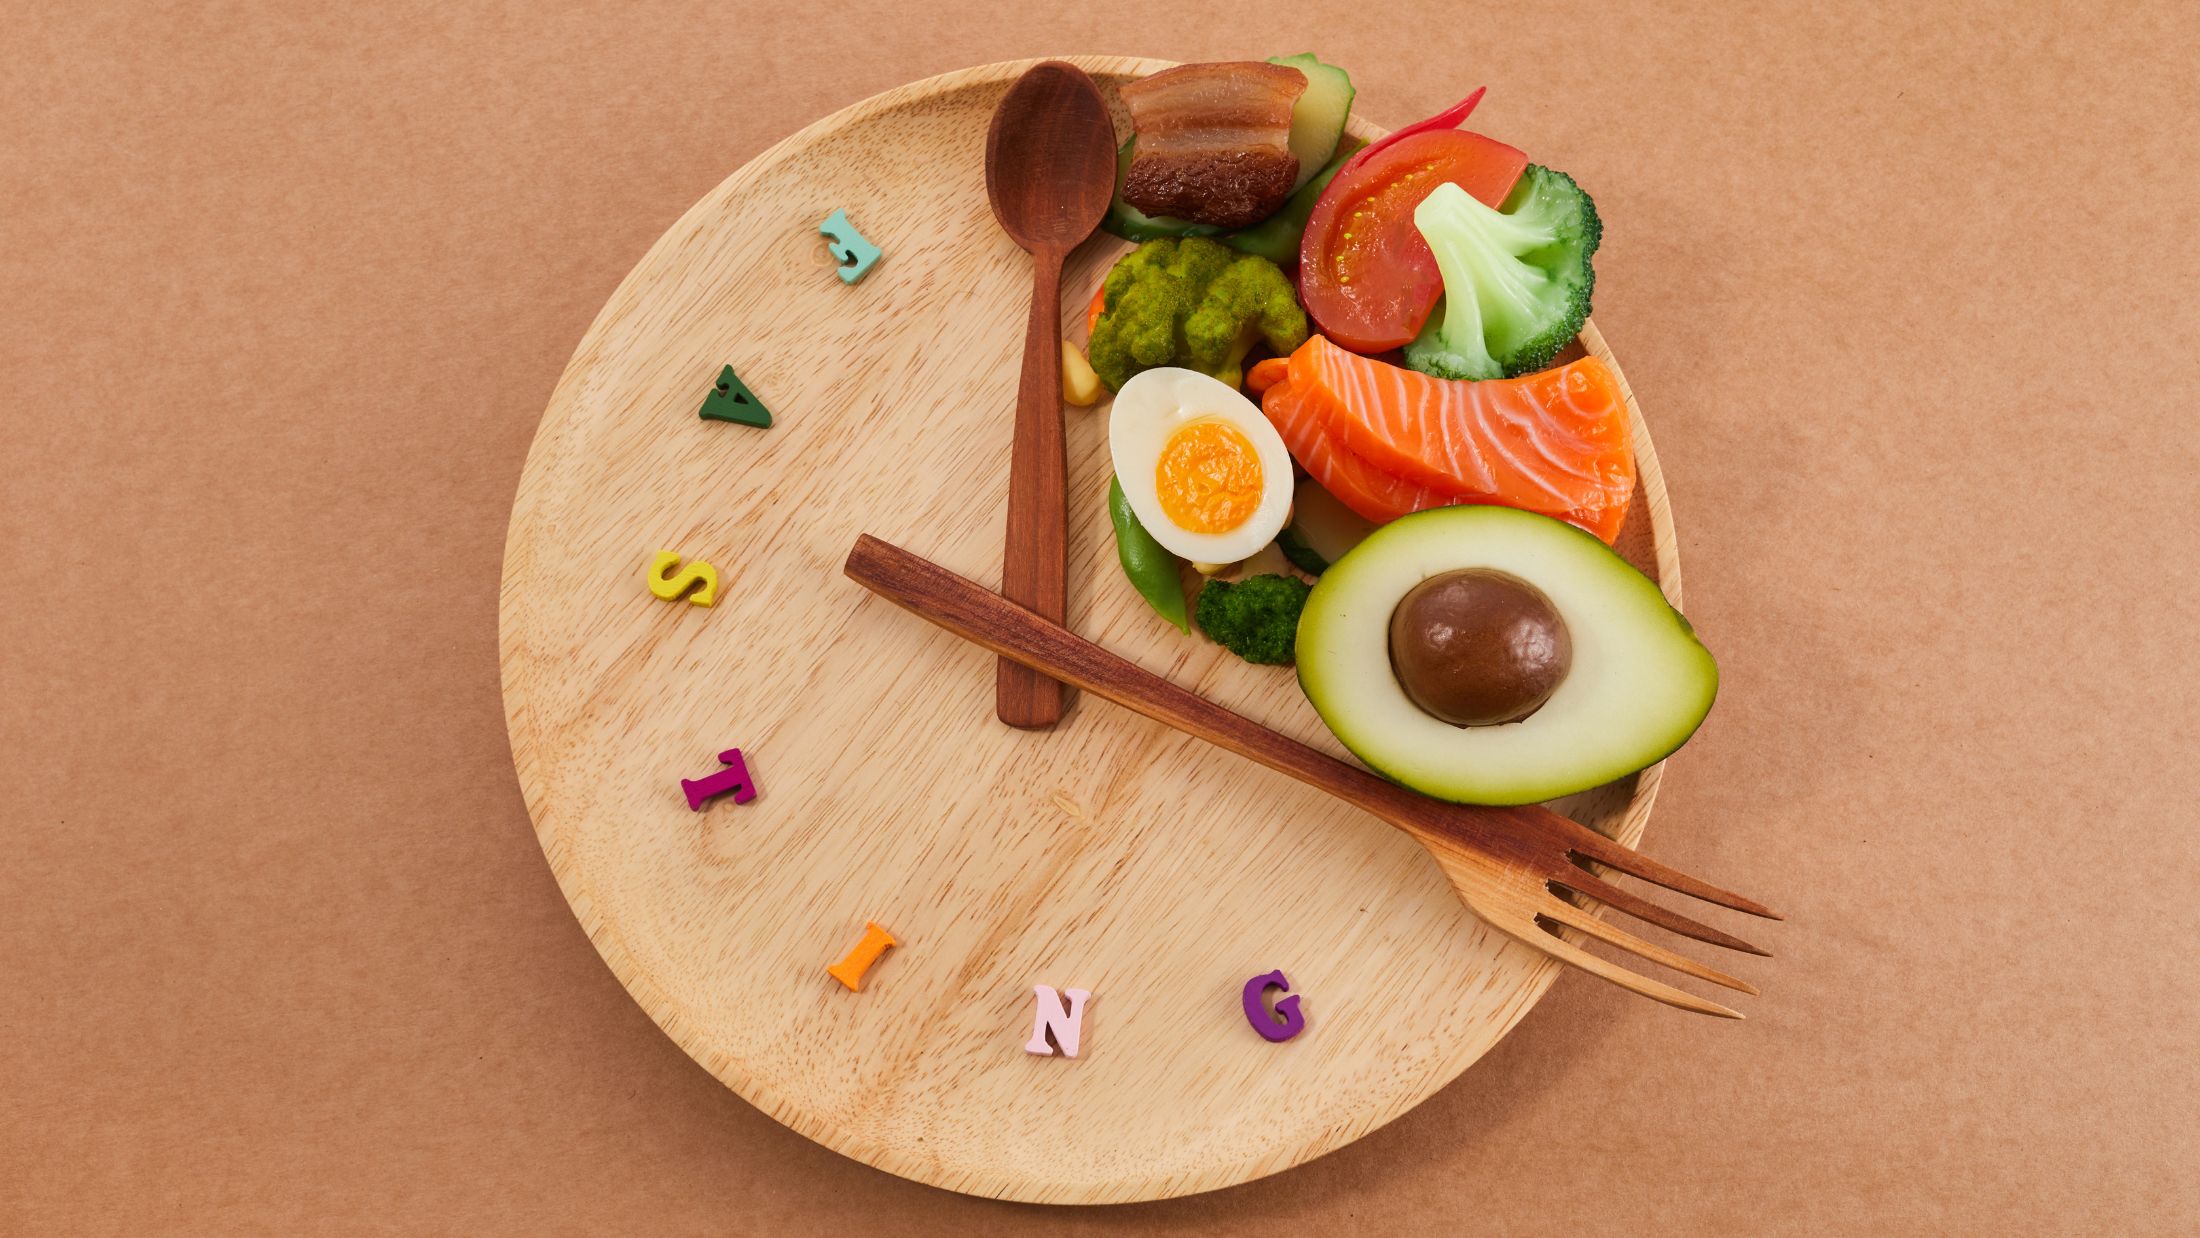 Creative representation of intermittent fasting with wooden plate with a clock face design. The food items on the plate could represent allowed eating periods during the day, while the empty space signifies fasting periods.